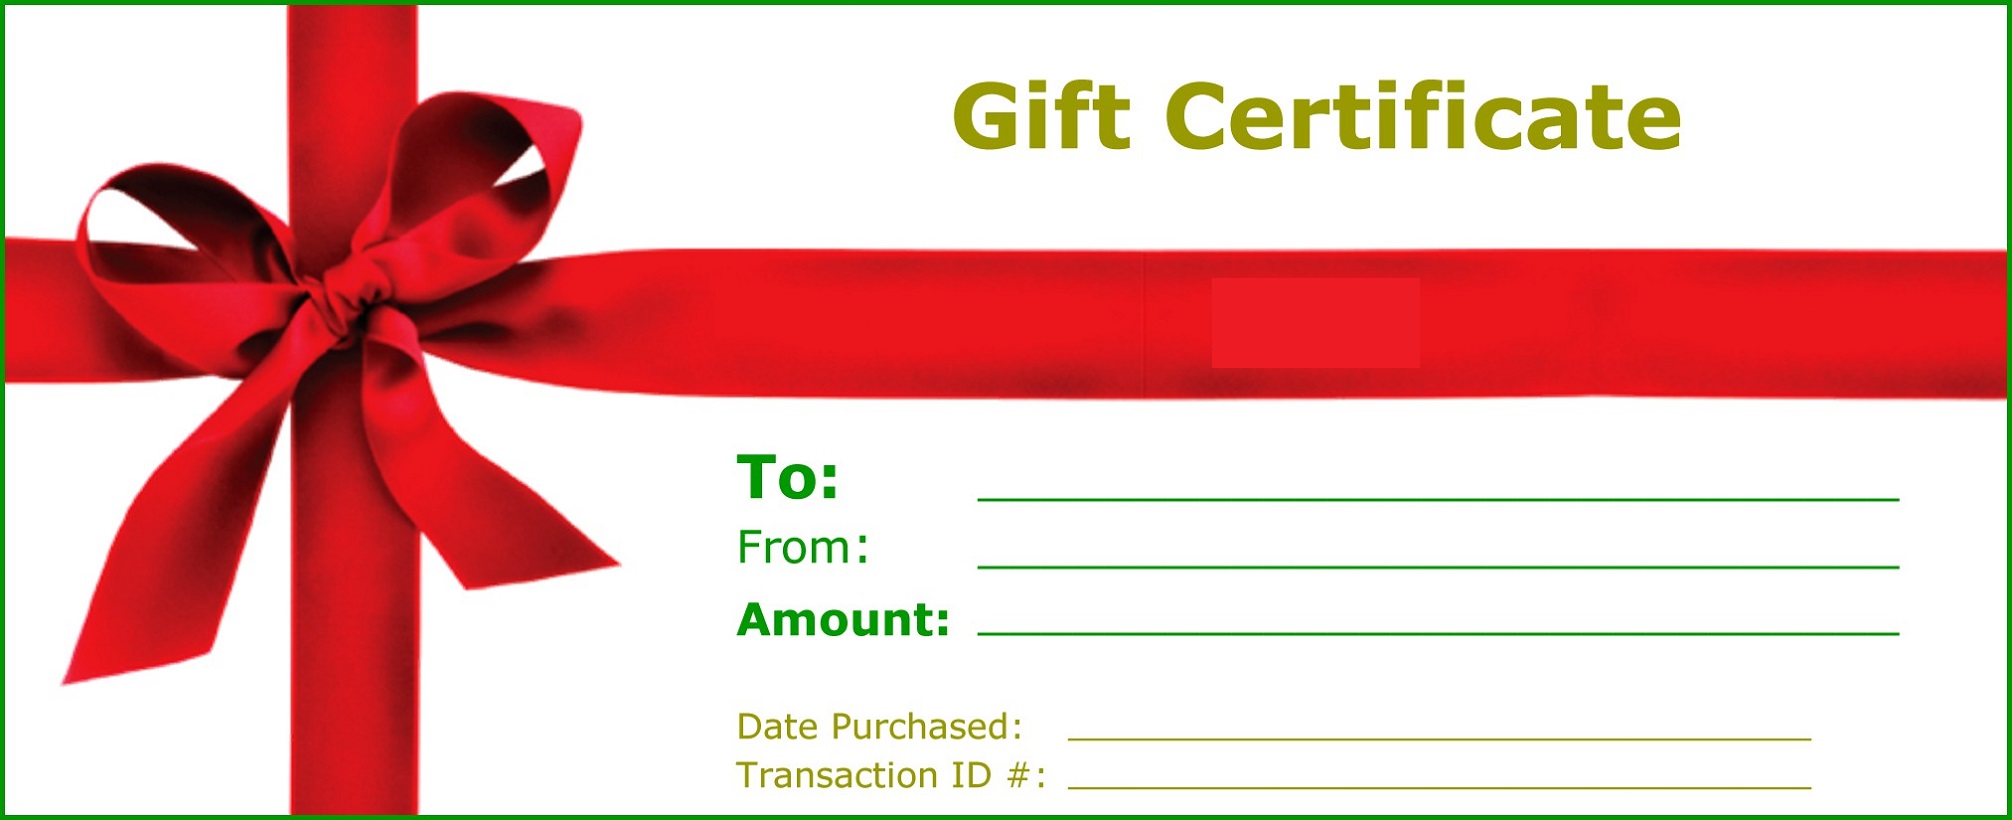 Gift Certificate Templates to Print | Activity Shelter